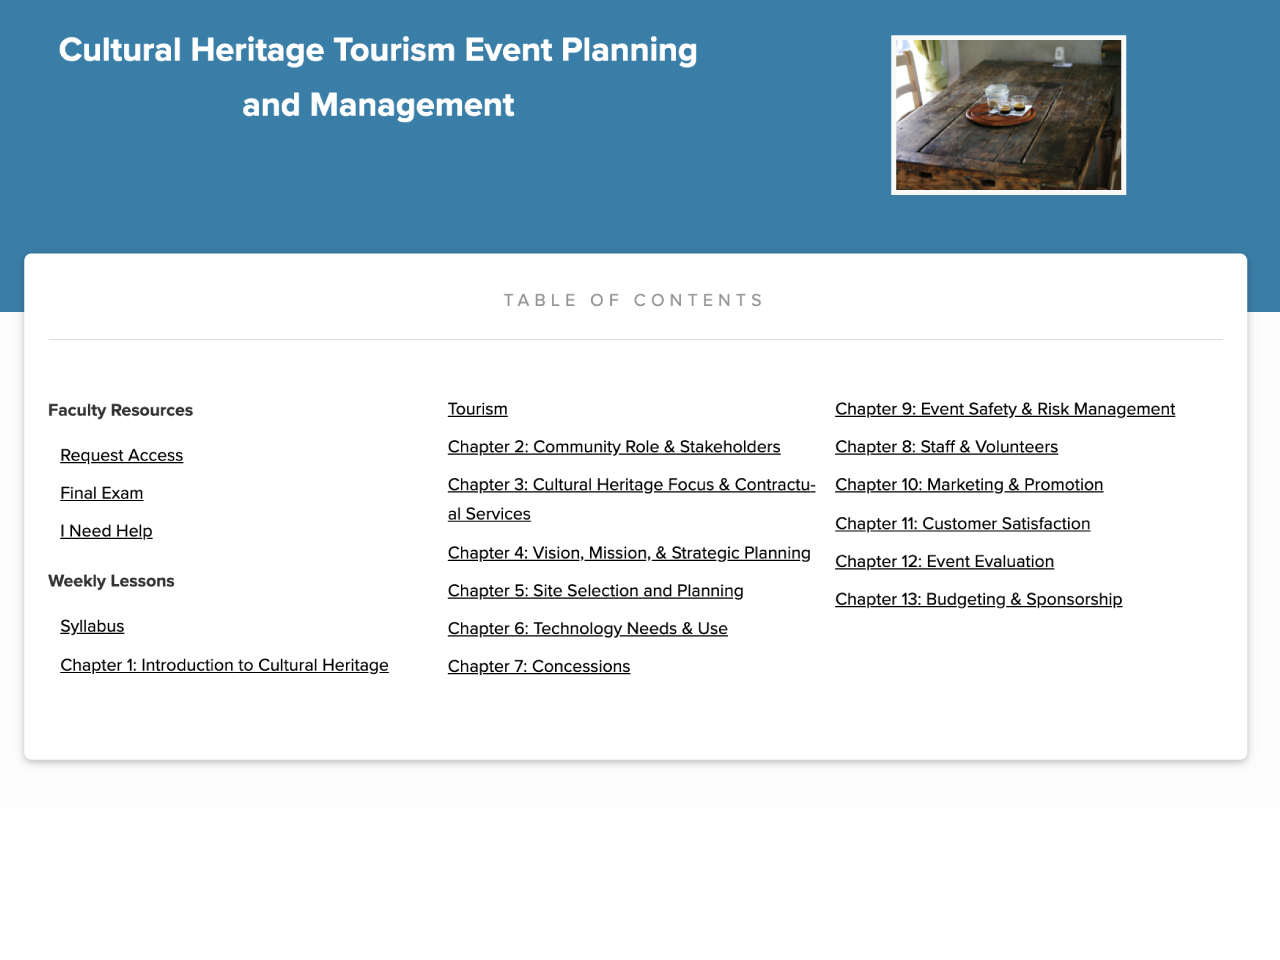 Cultural Heritage Tourism Event Planning and Management